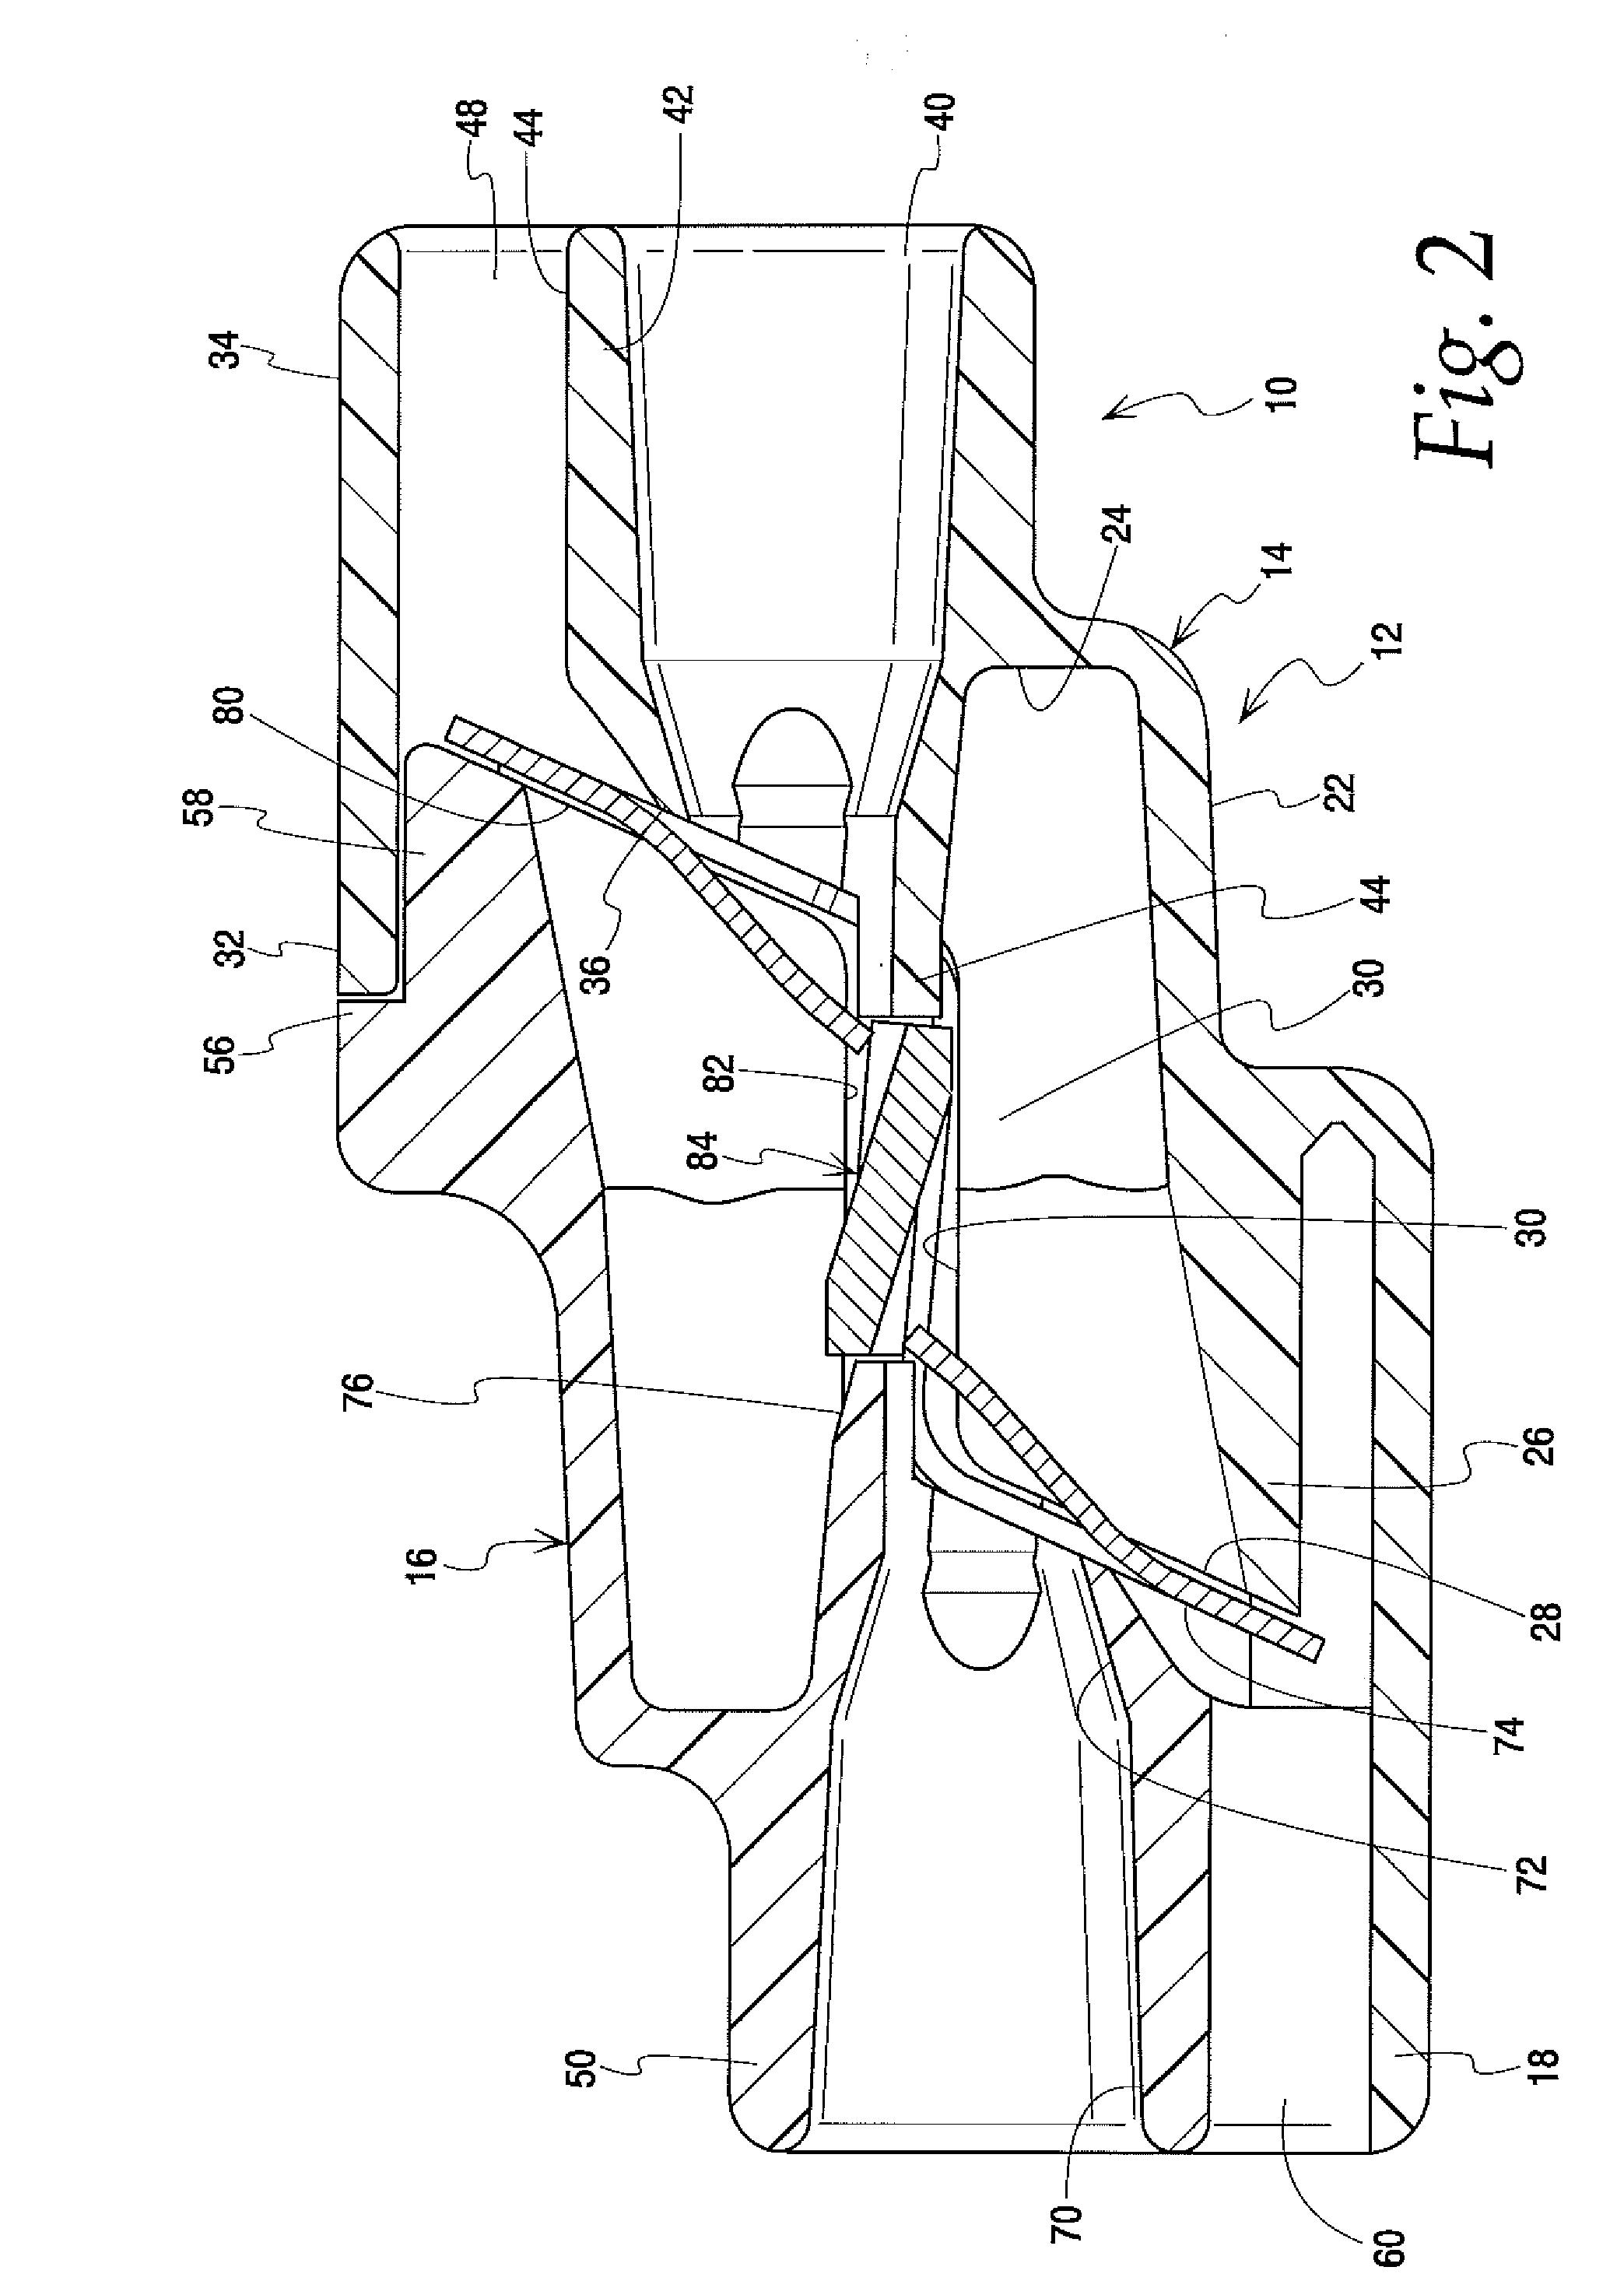 In-line push-in wire connector